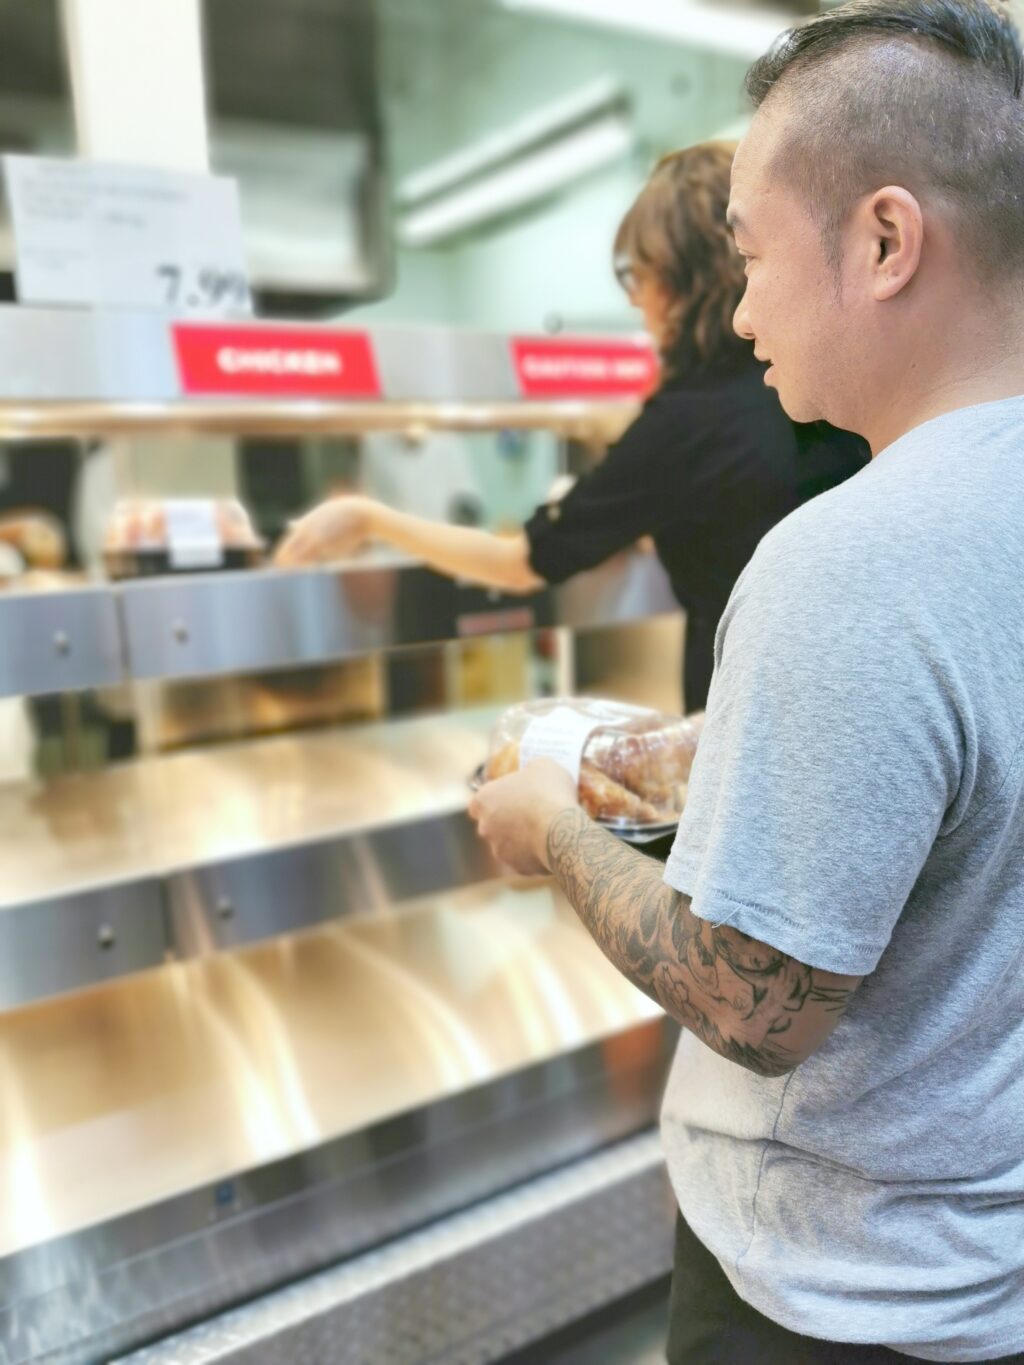 Darasak waits for a rotisserie chicken at Costco. 